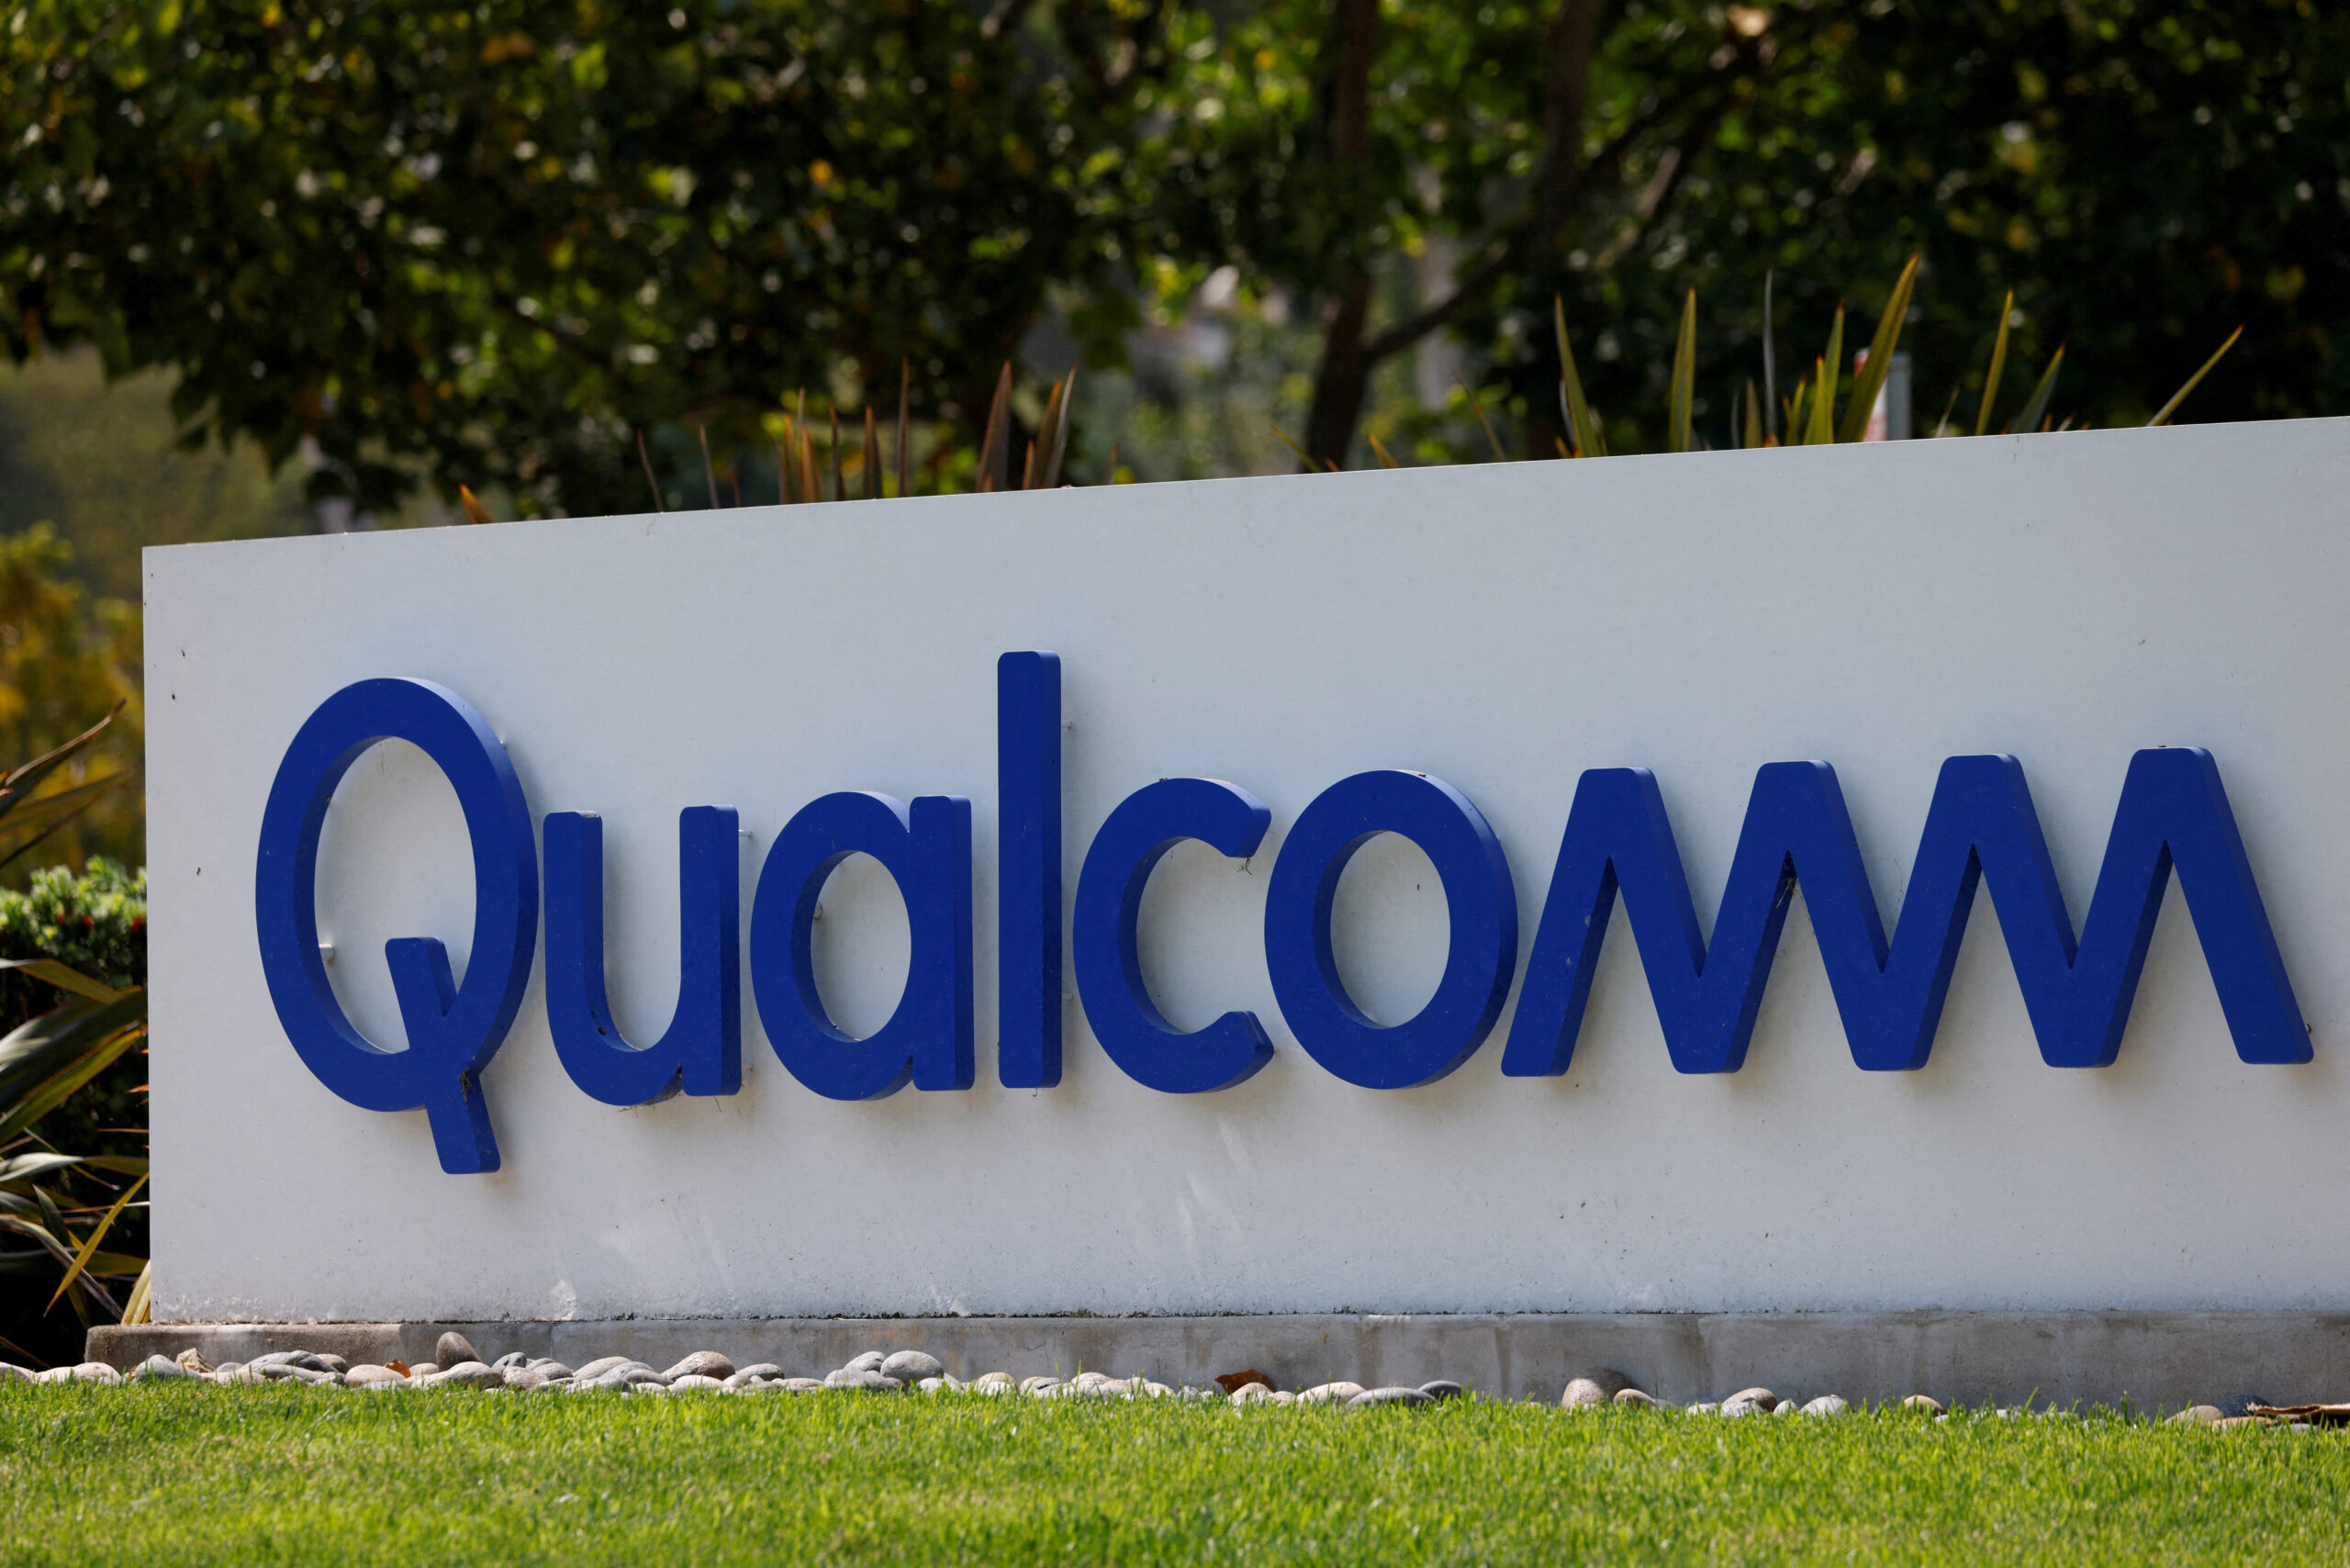 Qualcomm is hiring | Entry level Engineer | Apply here!